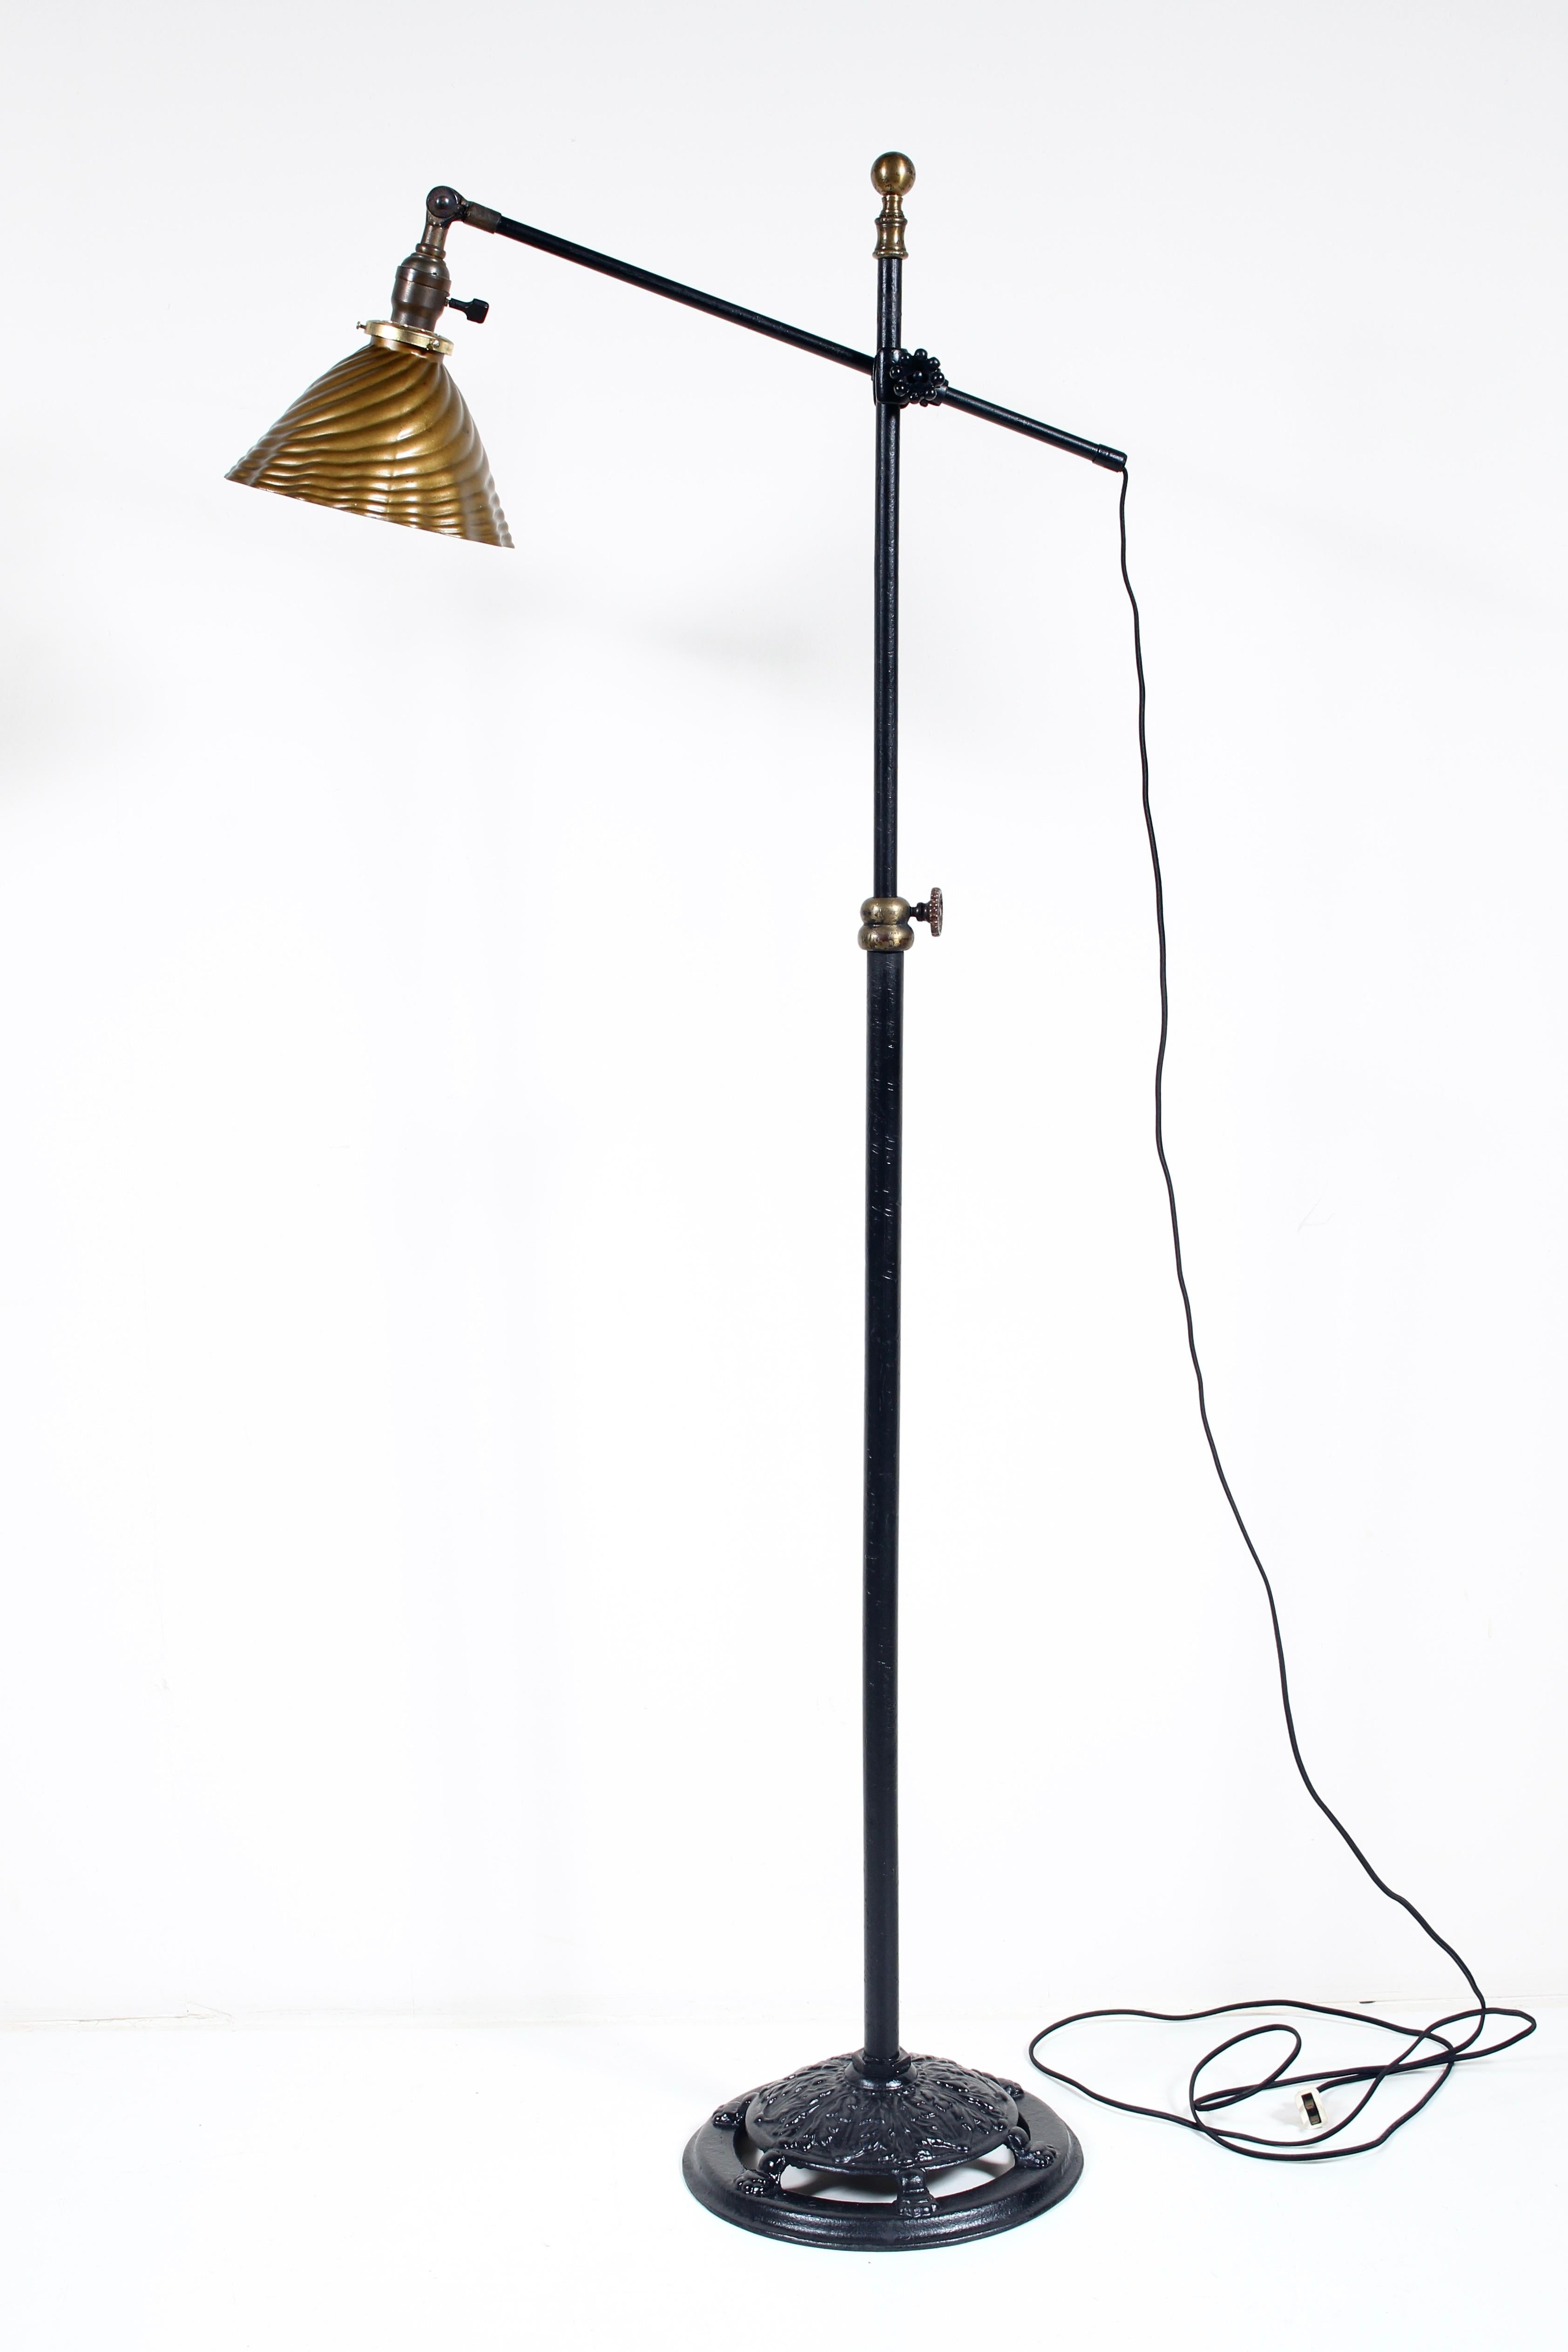 Early Articulating O. C. White Iron Arm & Brass Floor Lamp + Mercury Glass Shade For Sale 1